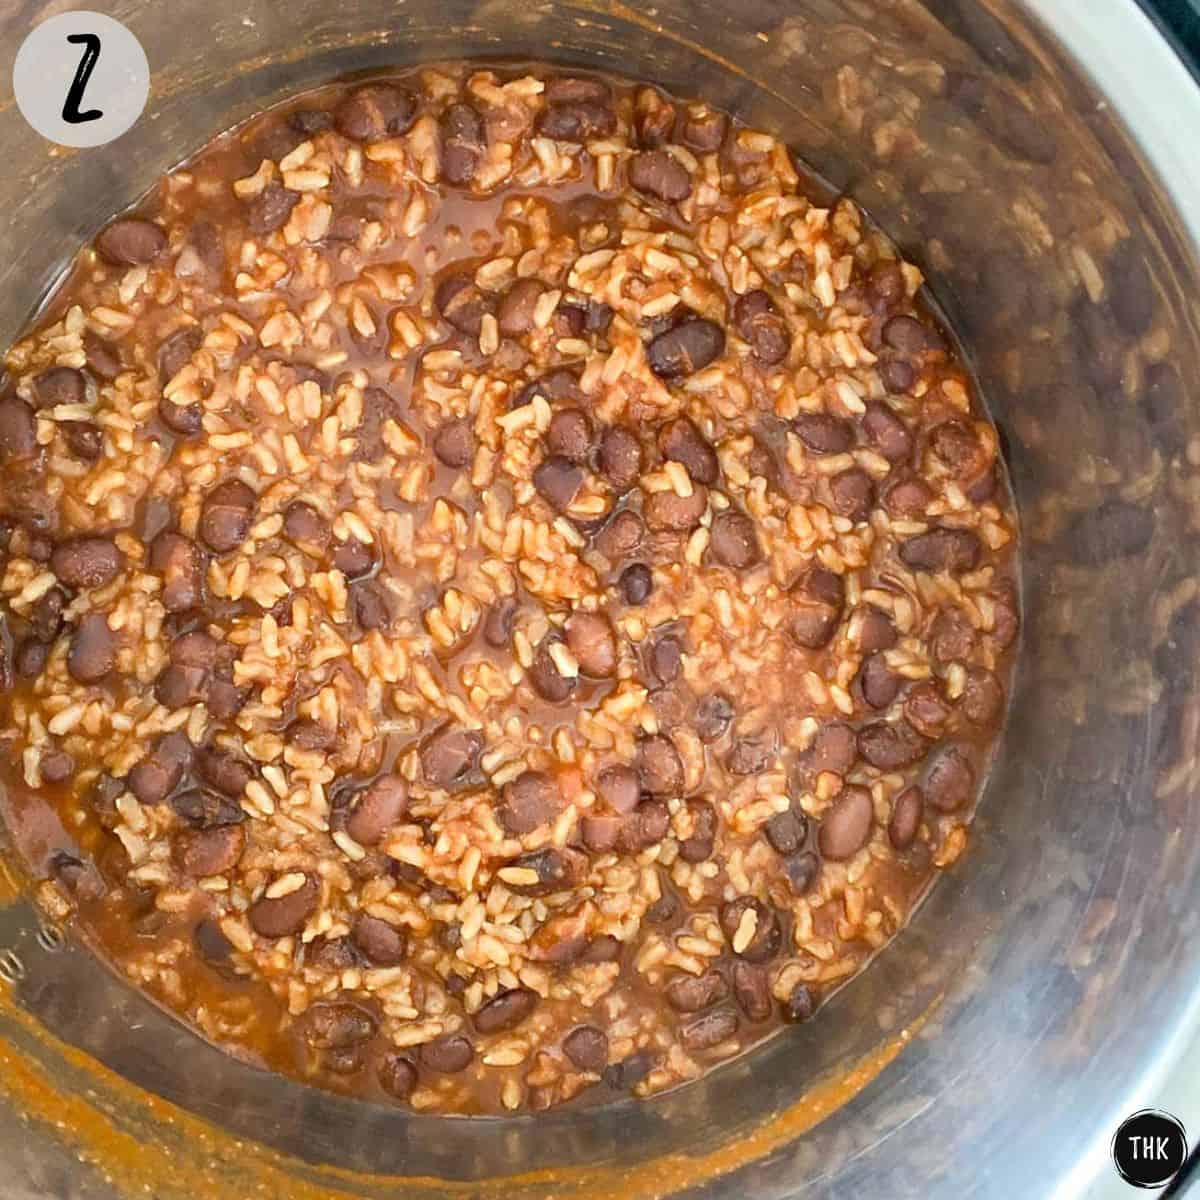 Cooked rice and beans inside Instant Pot.